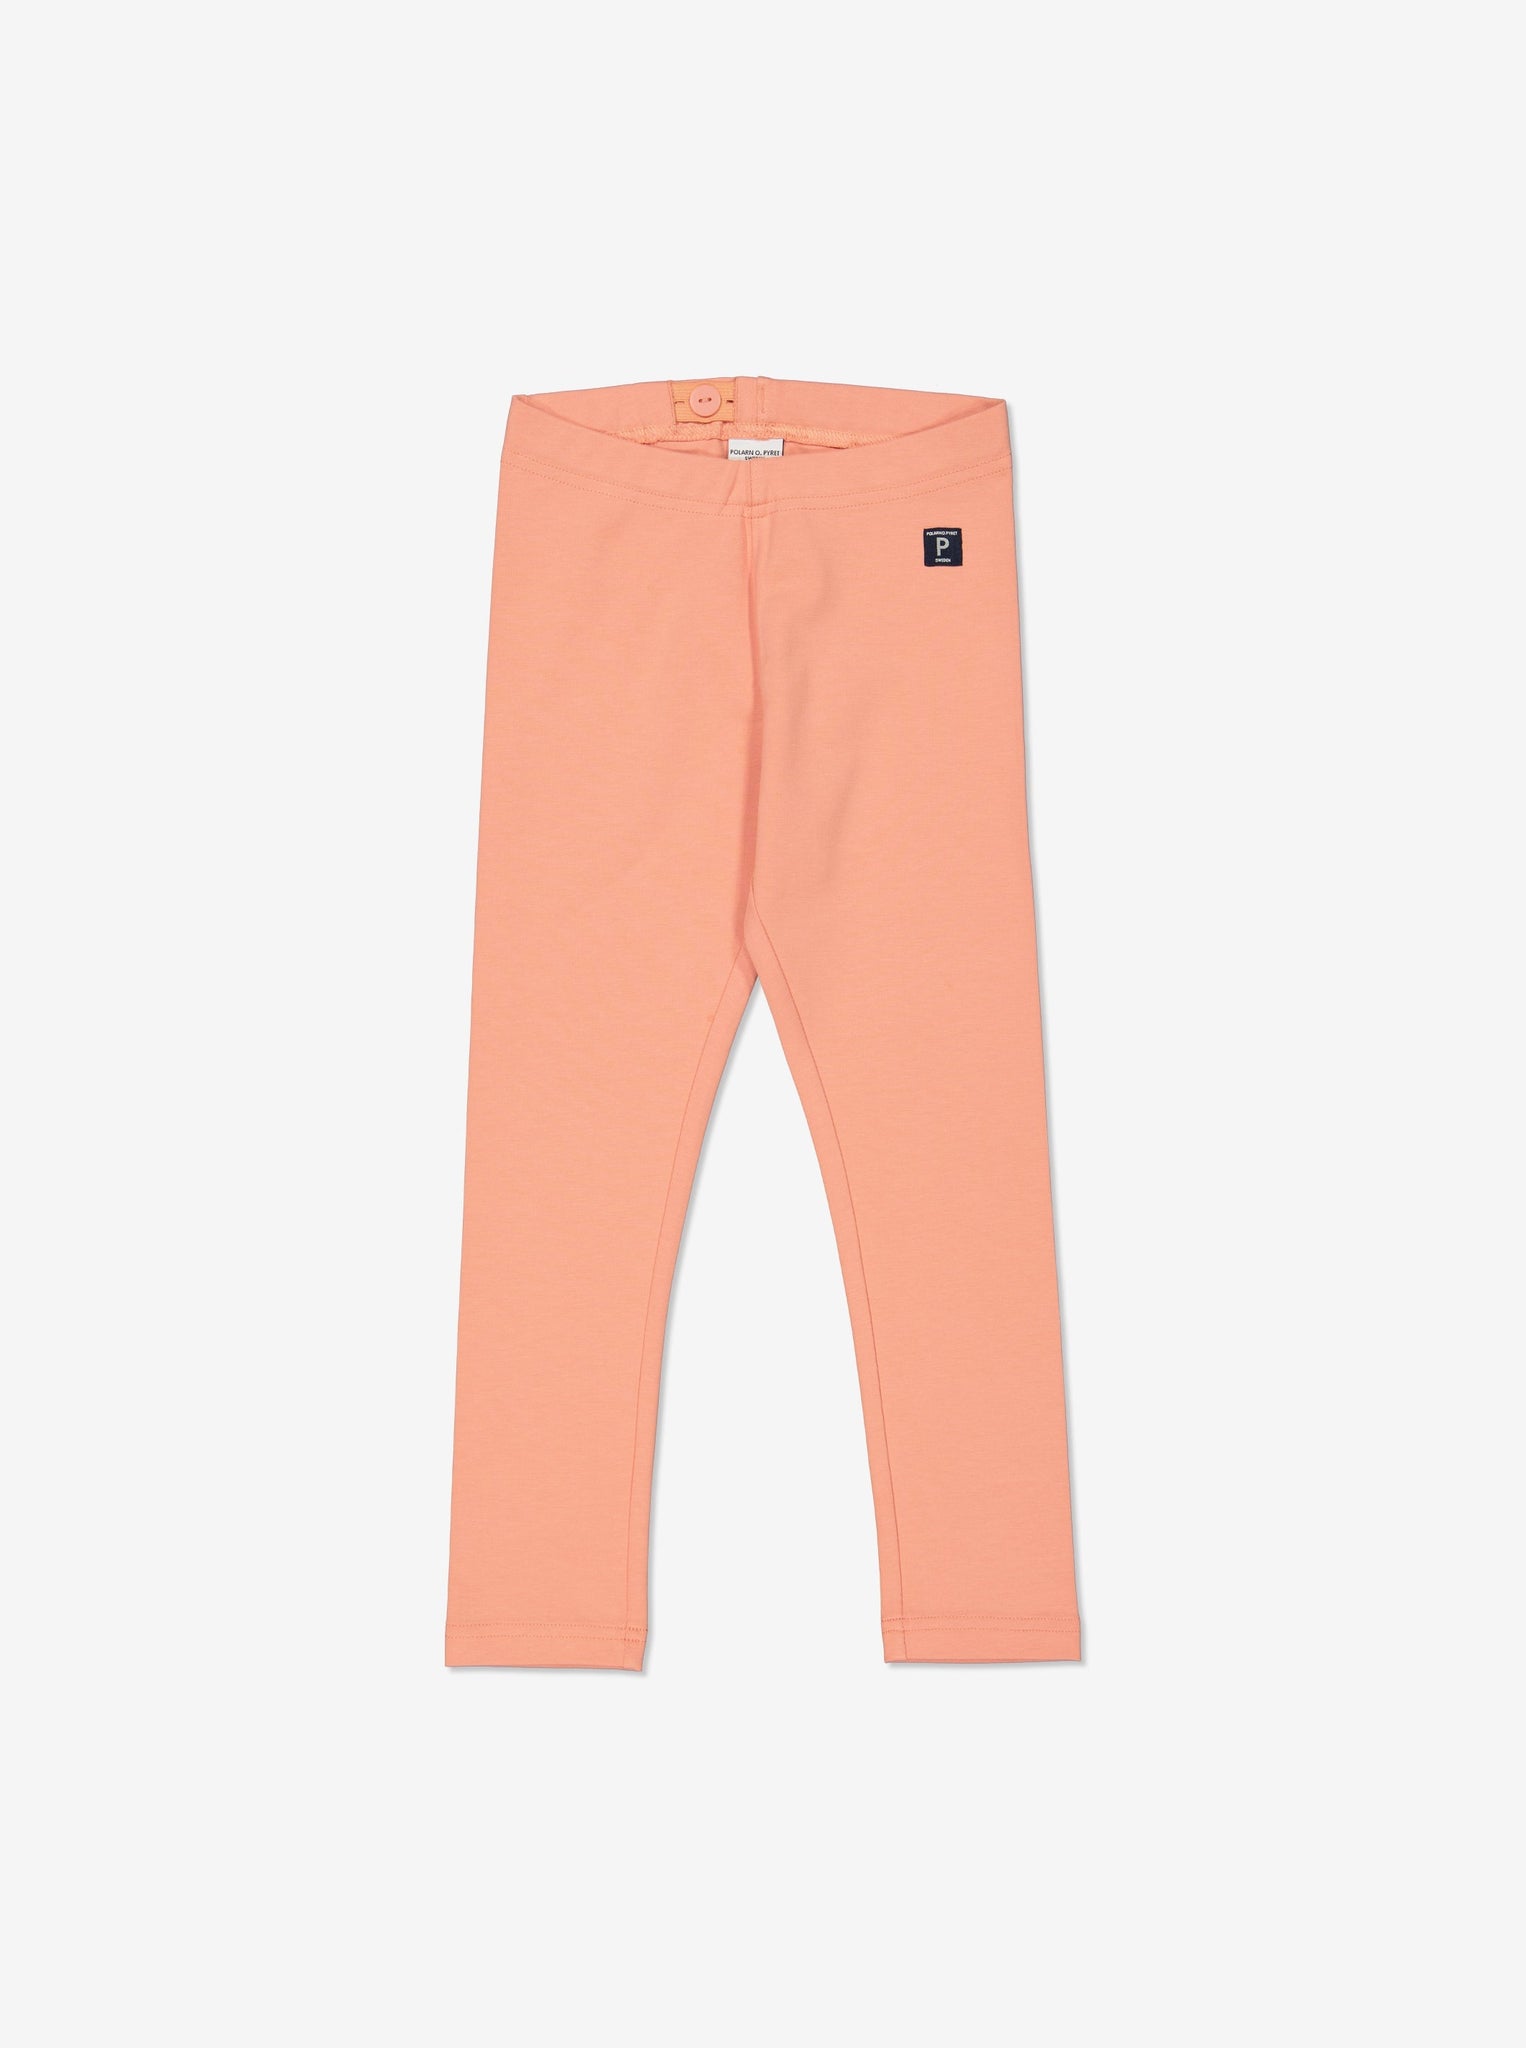 Organic Cotton Peach Kids Leggings from Polarn O. Pyret Kidswear. Made from ethically sourced materials.